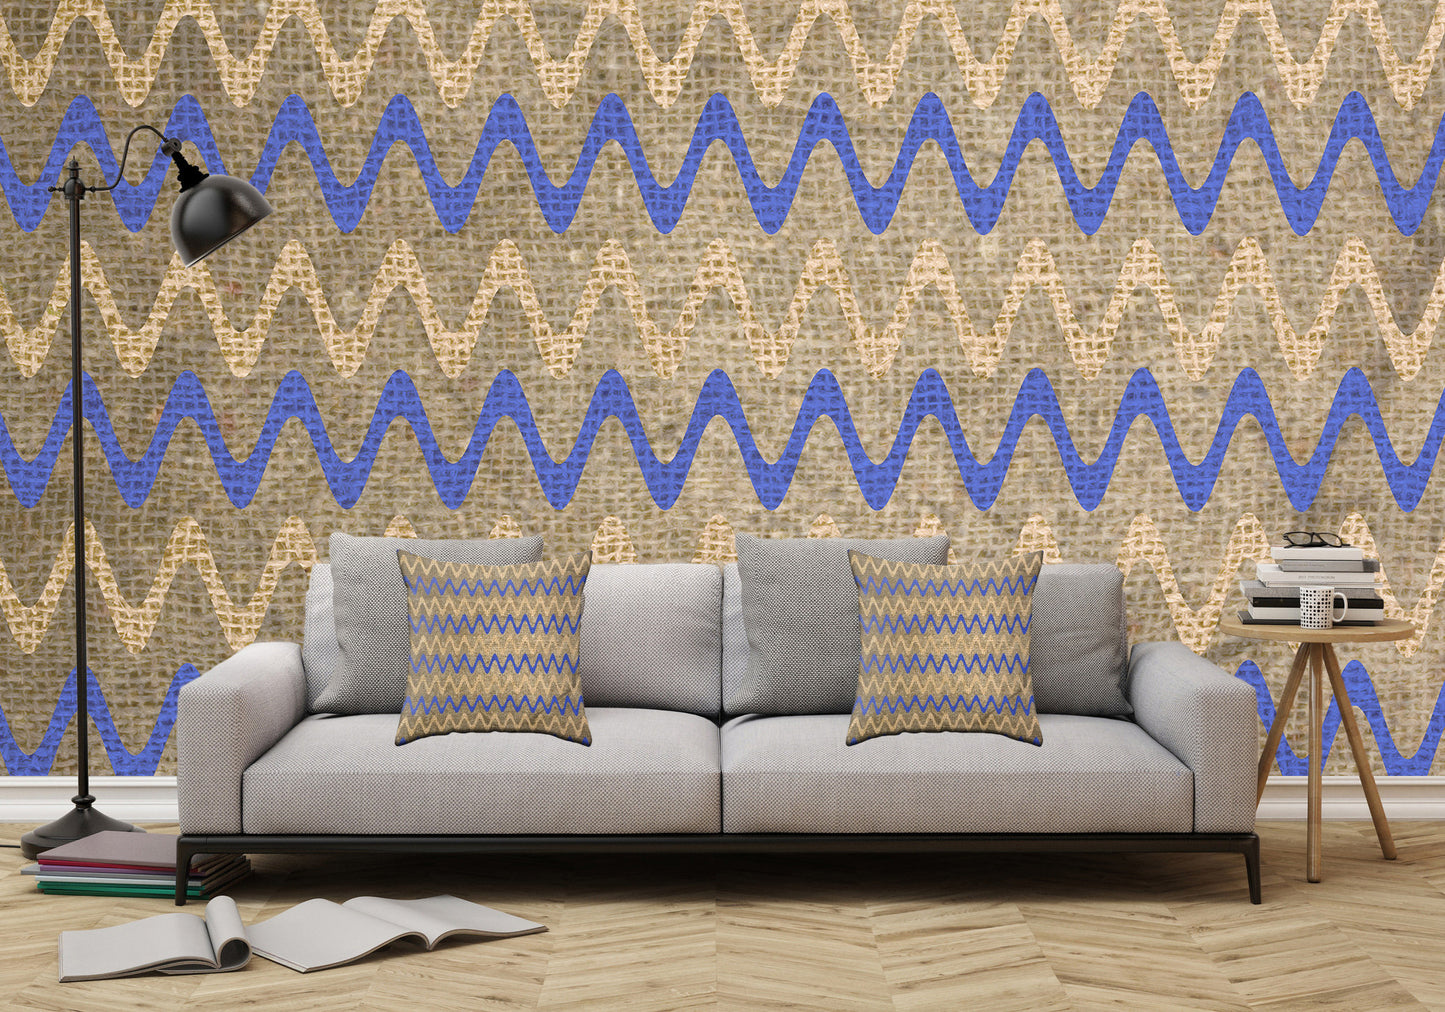 Blue and Tan Zigzag Stripes on Grungy Brown Burlap - Adhesive Wallpaper - Removable Wallpaper - Wall Sticker - Full Size Wall Mural  - PIPAFINEART